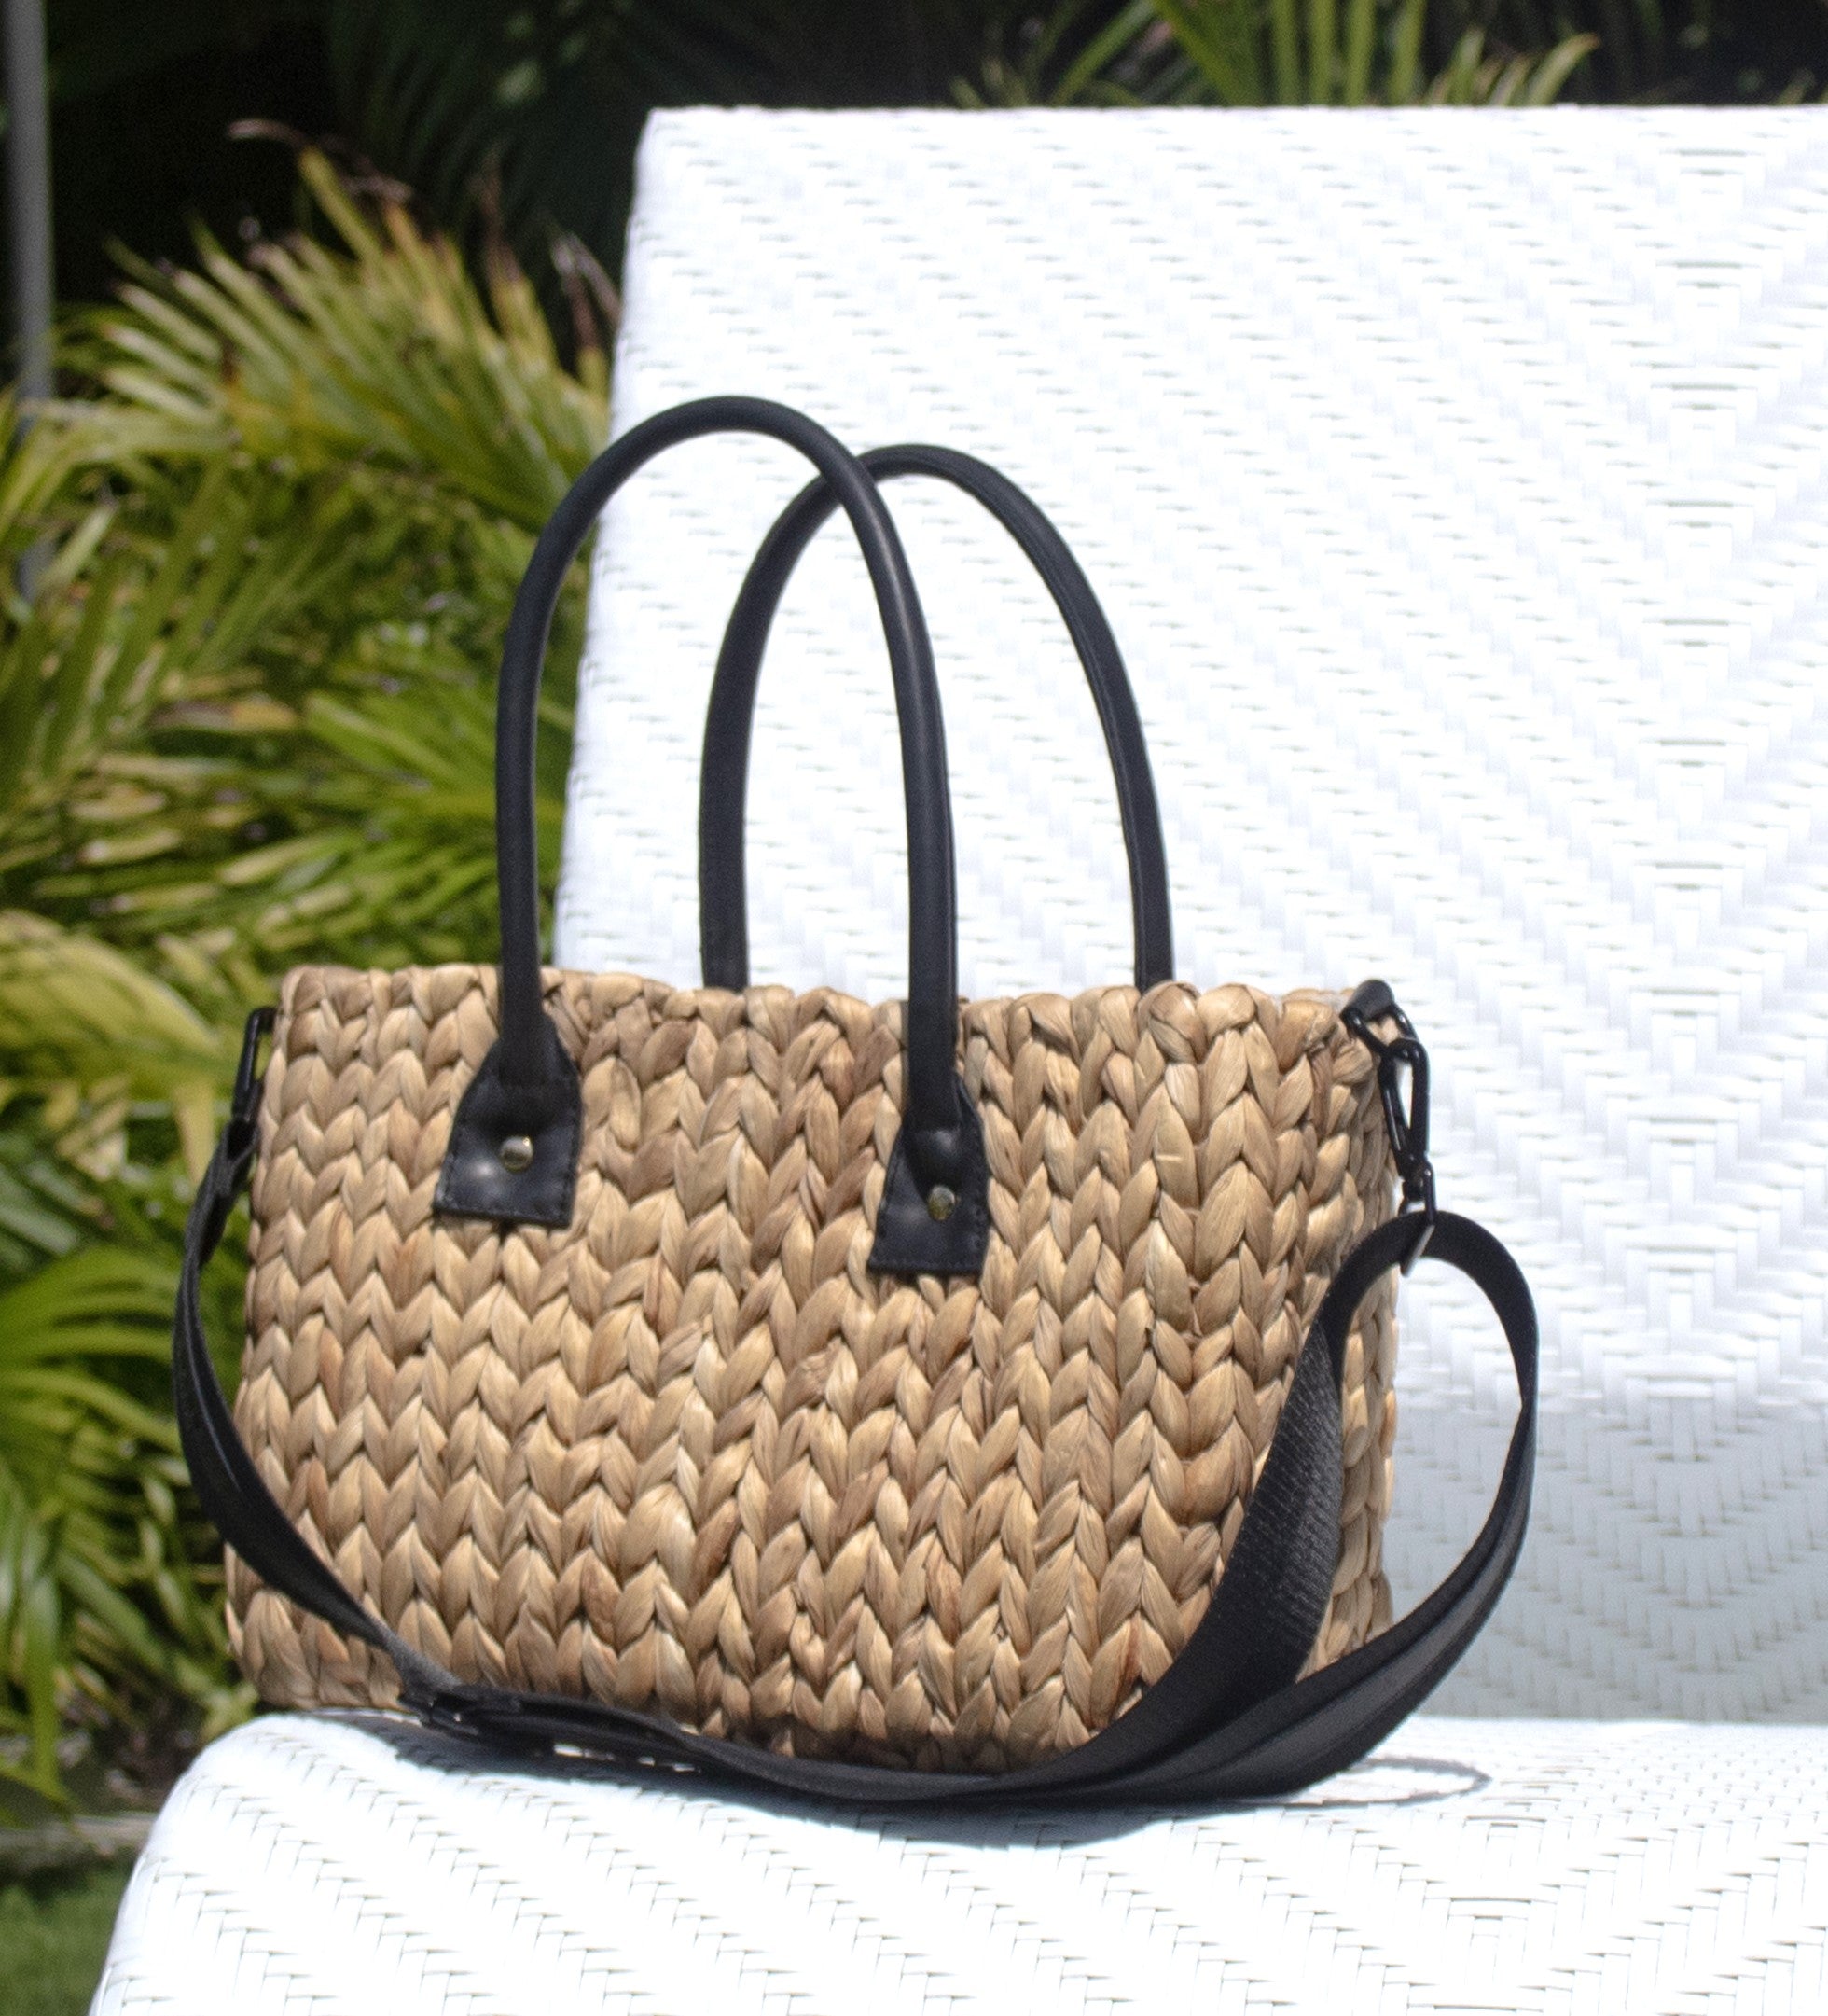 Mid-sized Hyacinth Straw Bag with black leather handles